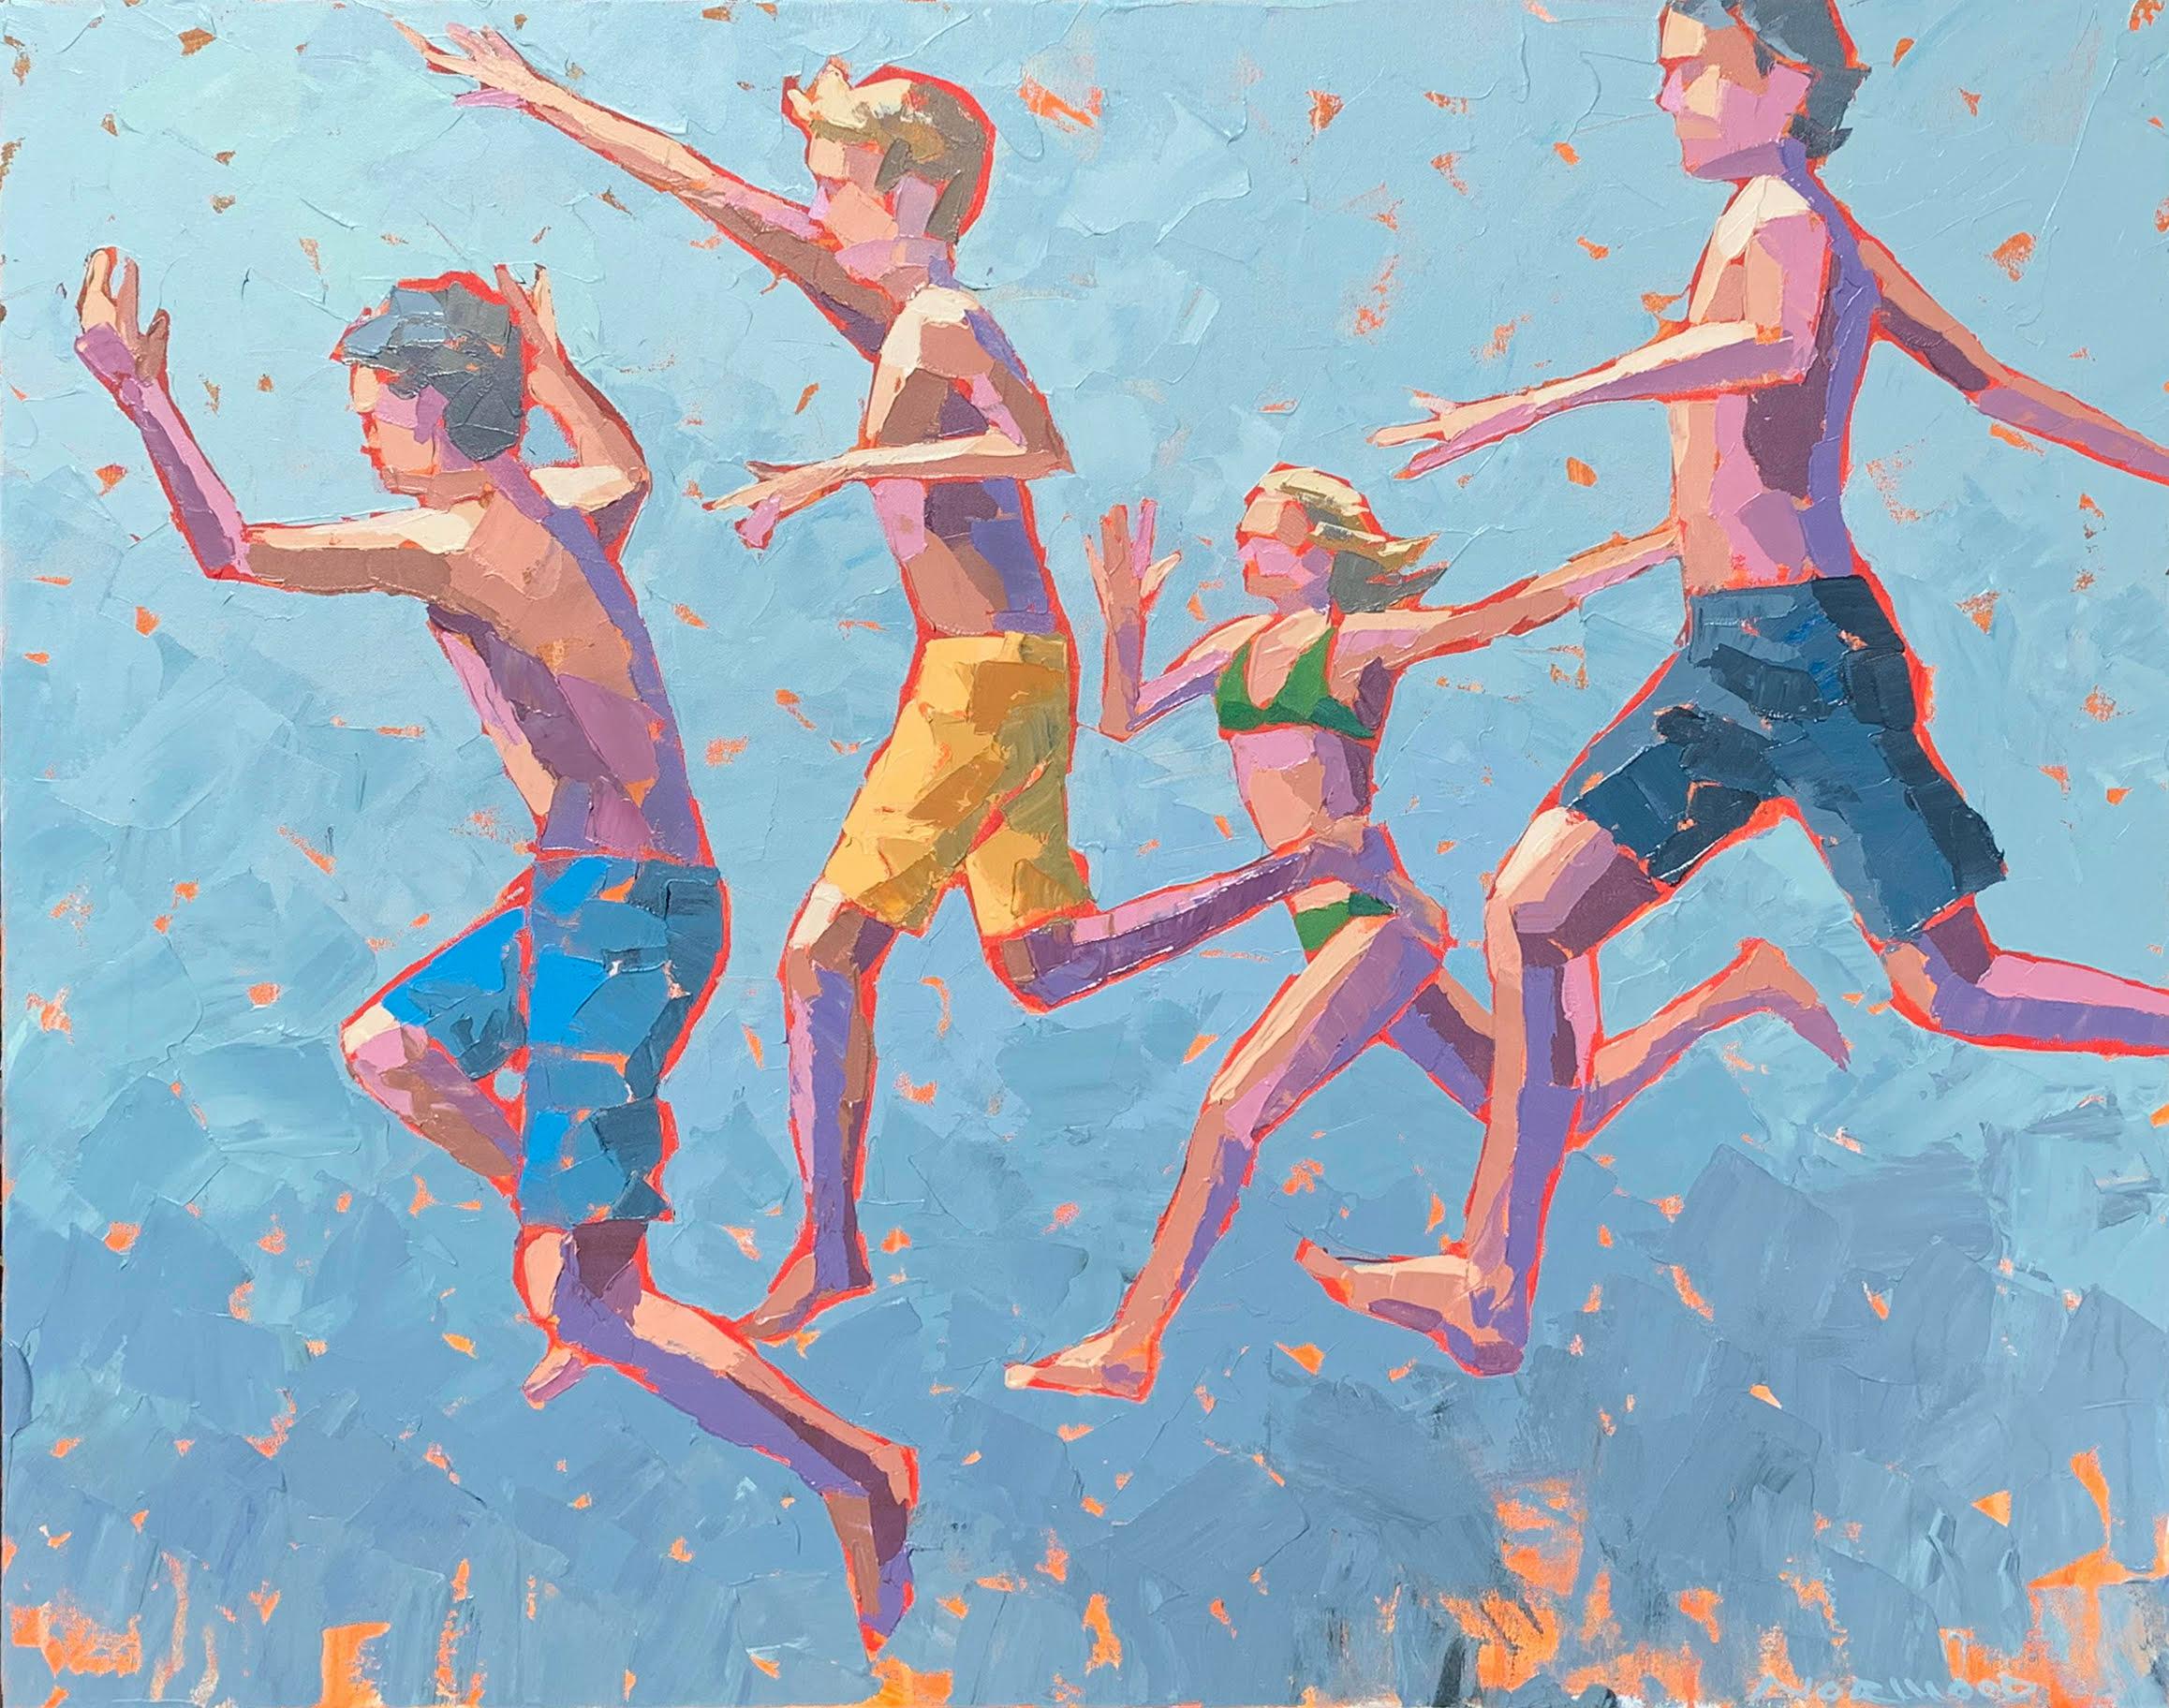 Paul Norwood Figurative Painting - "Walking on Air" impasto acrylic painting of kids in swimsuits jumping